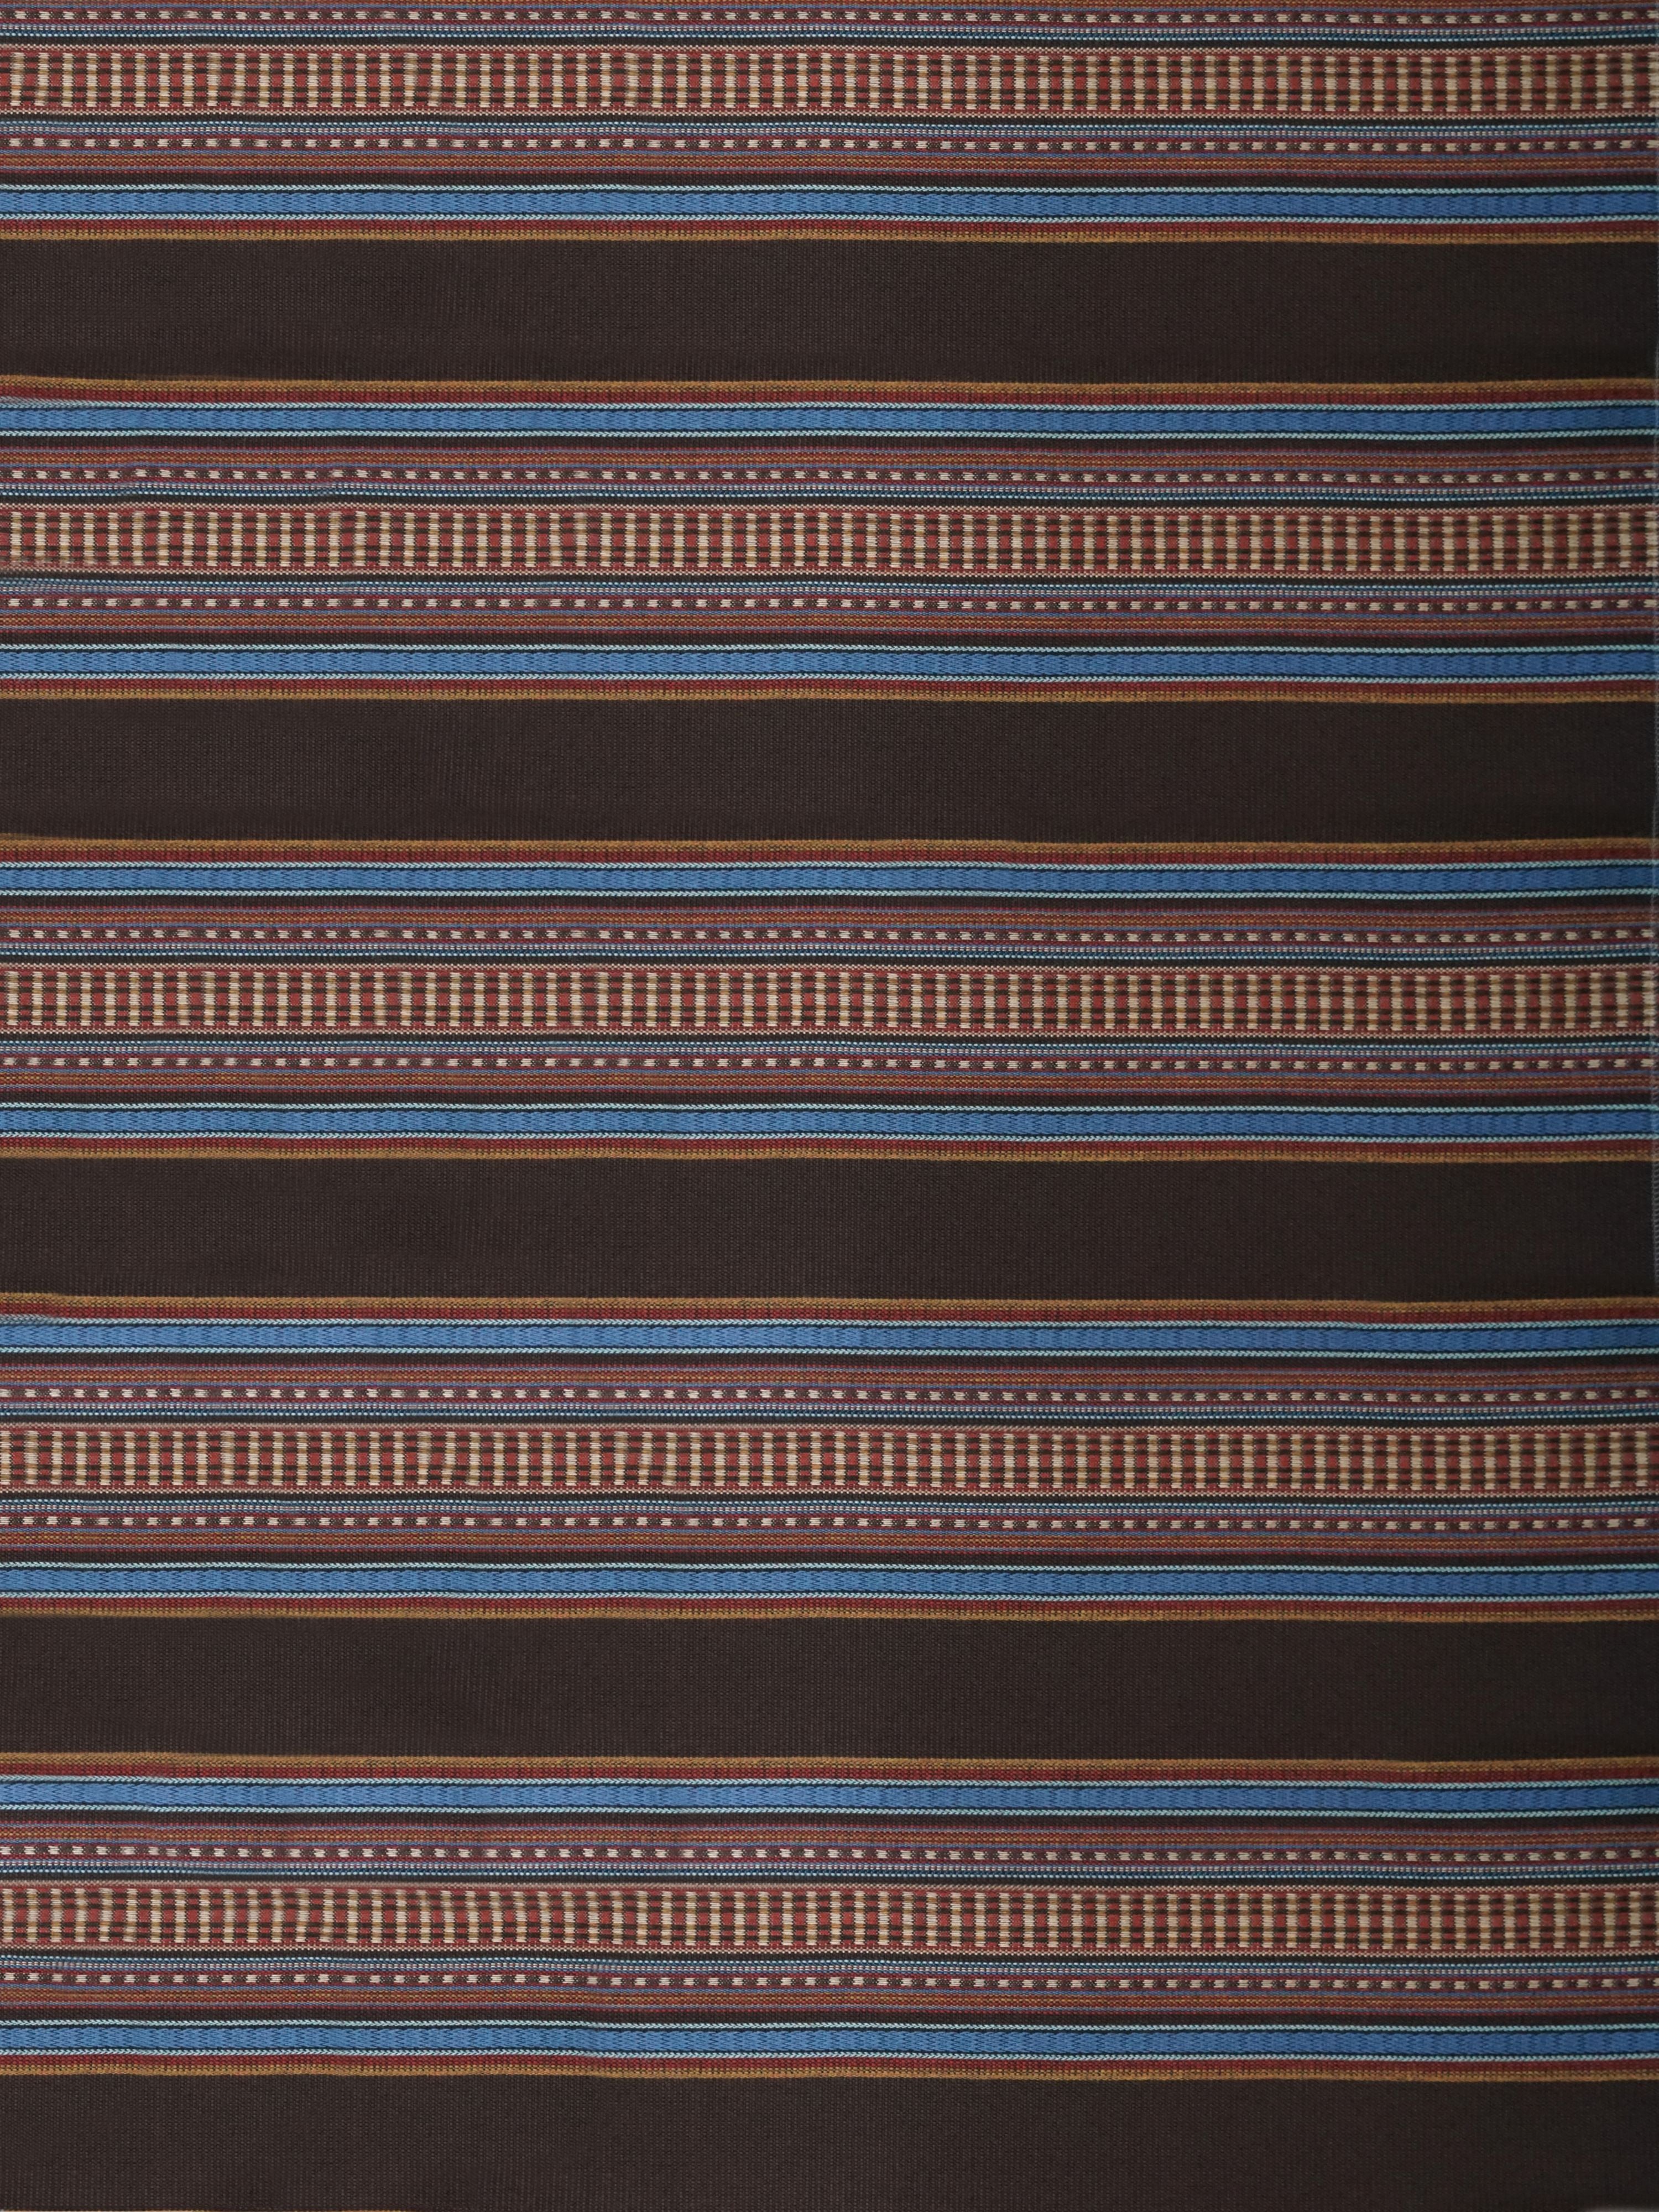 Steinbeck fabric in chocolate color - pattern number SU 00004009 - by Scalamandre in the Old World Weavers collection